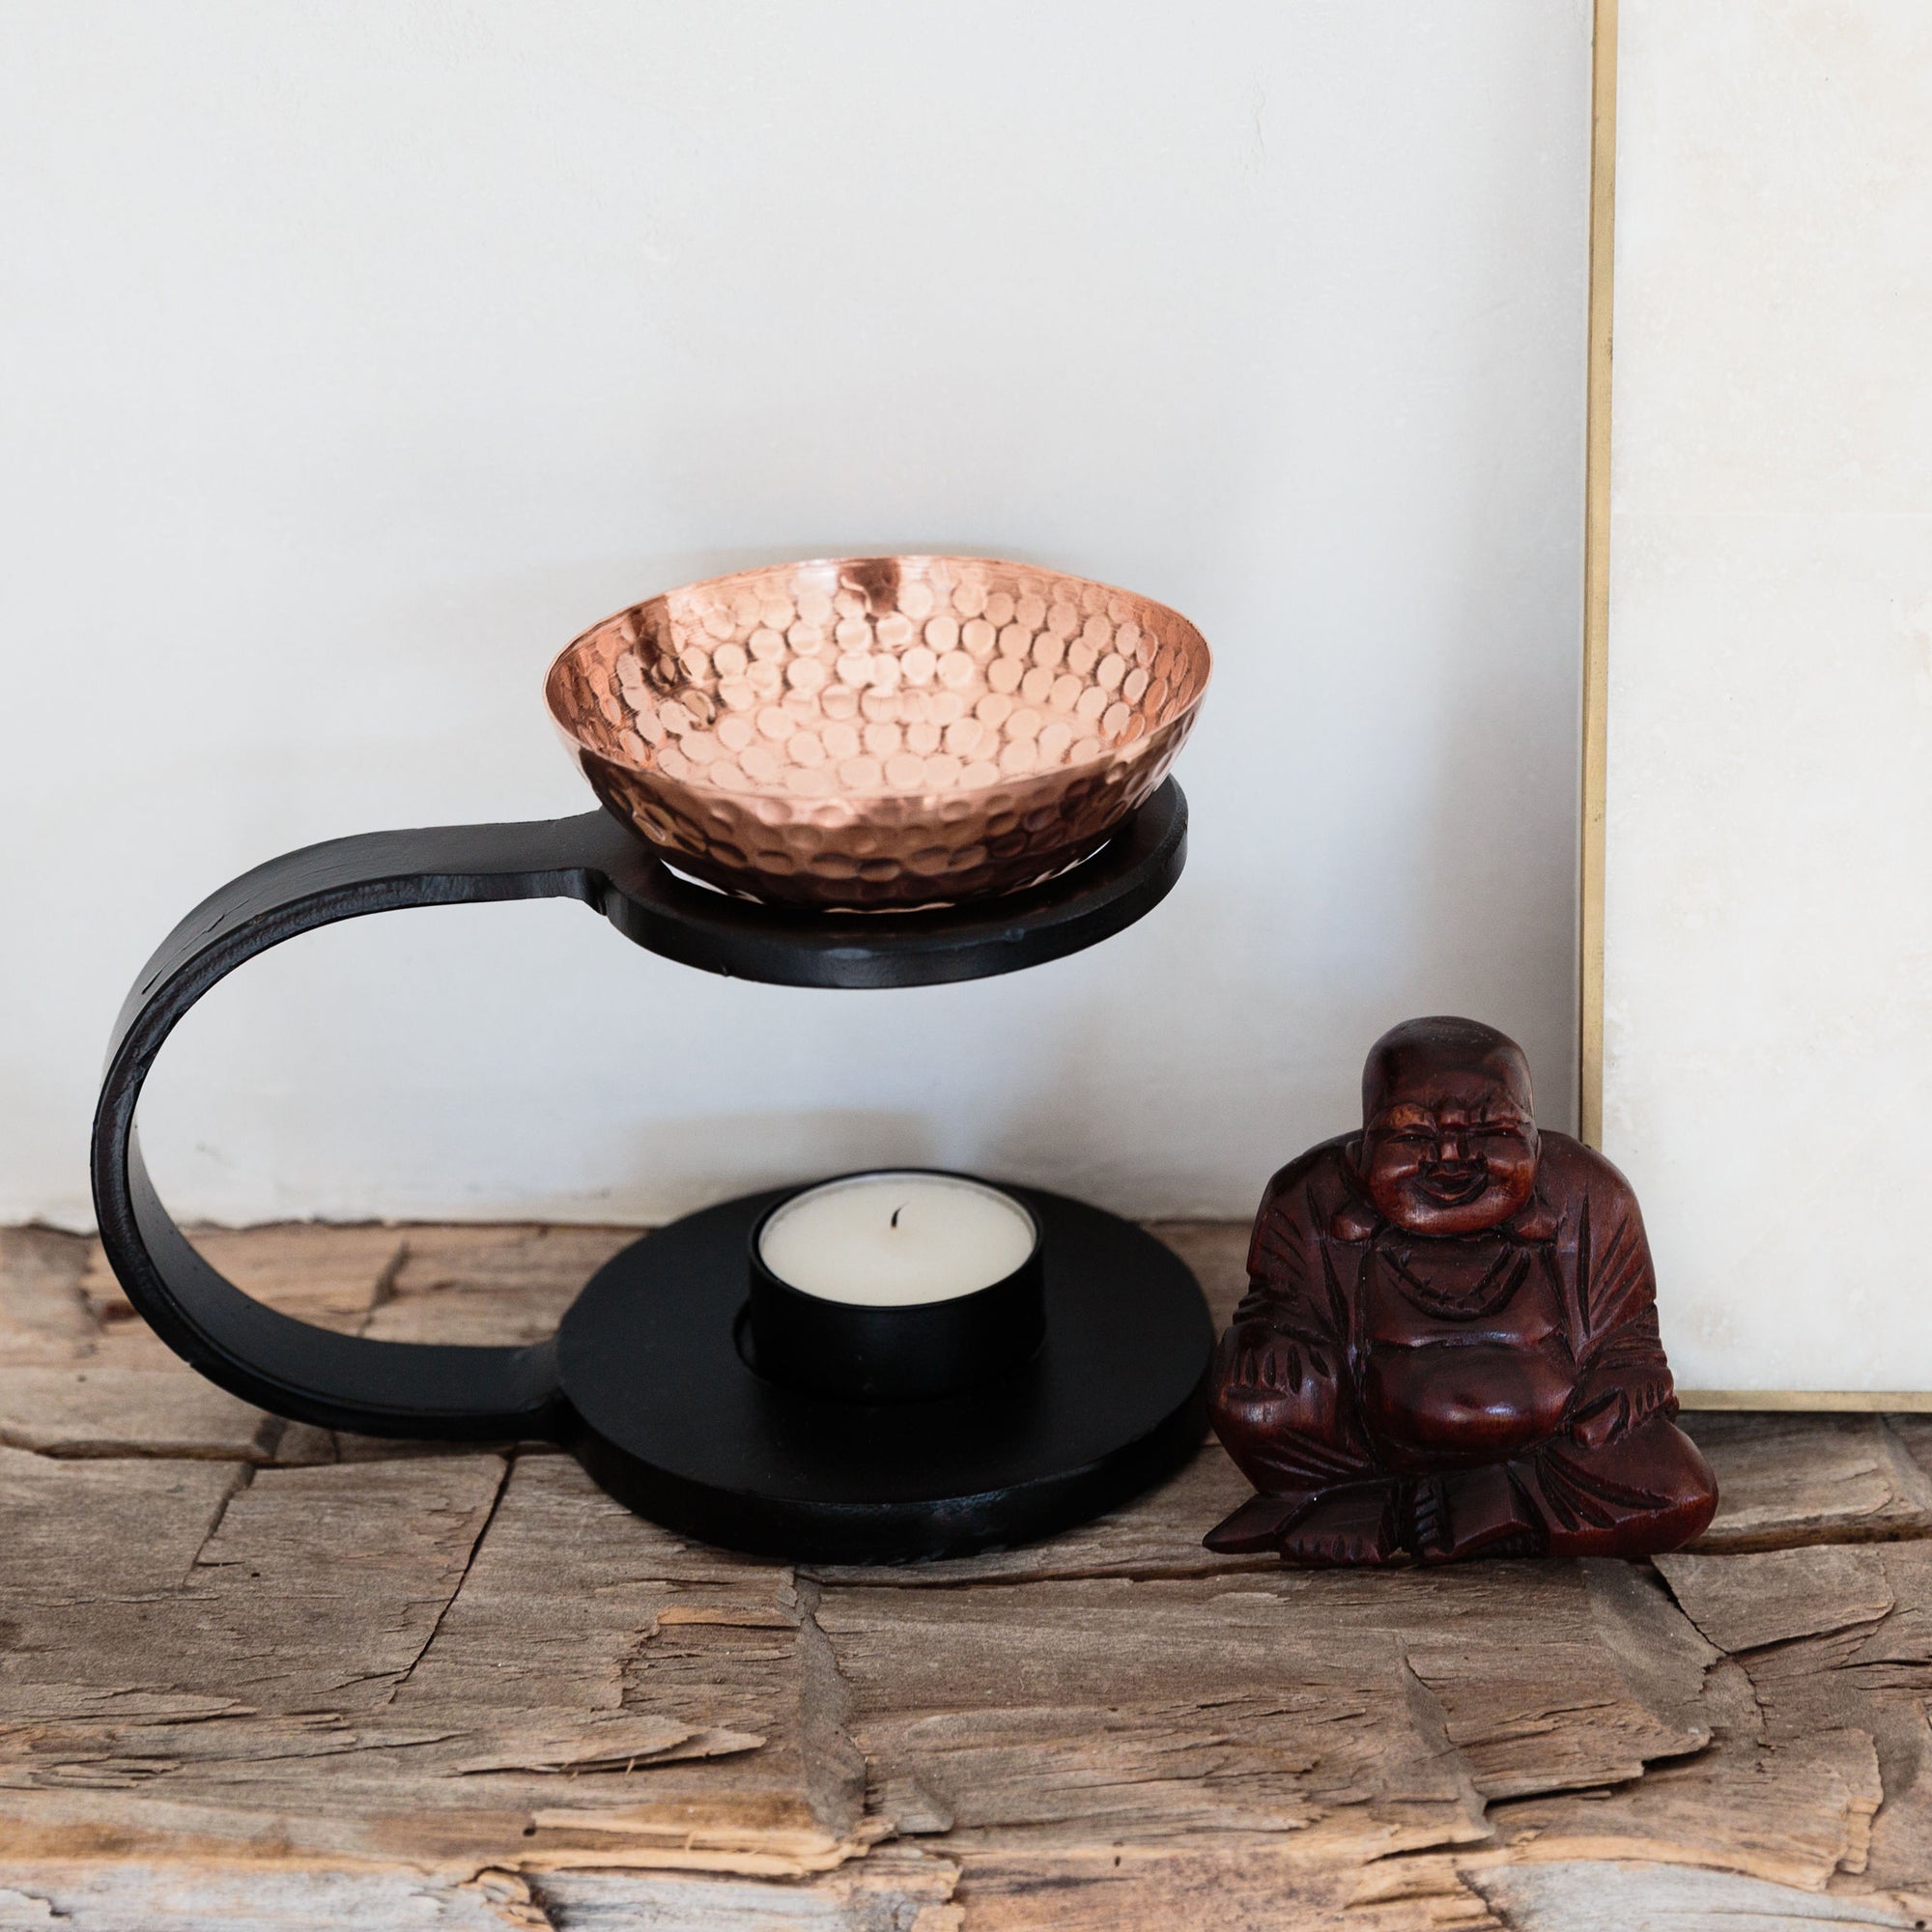 copper diffuser sitting on a shelf next to a carved wooden buddha